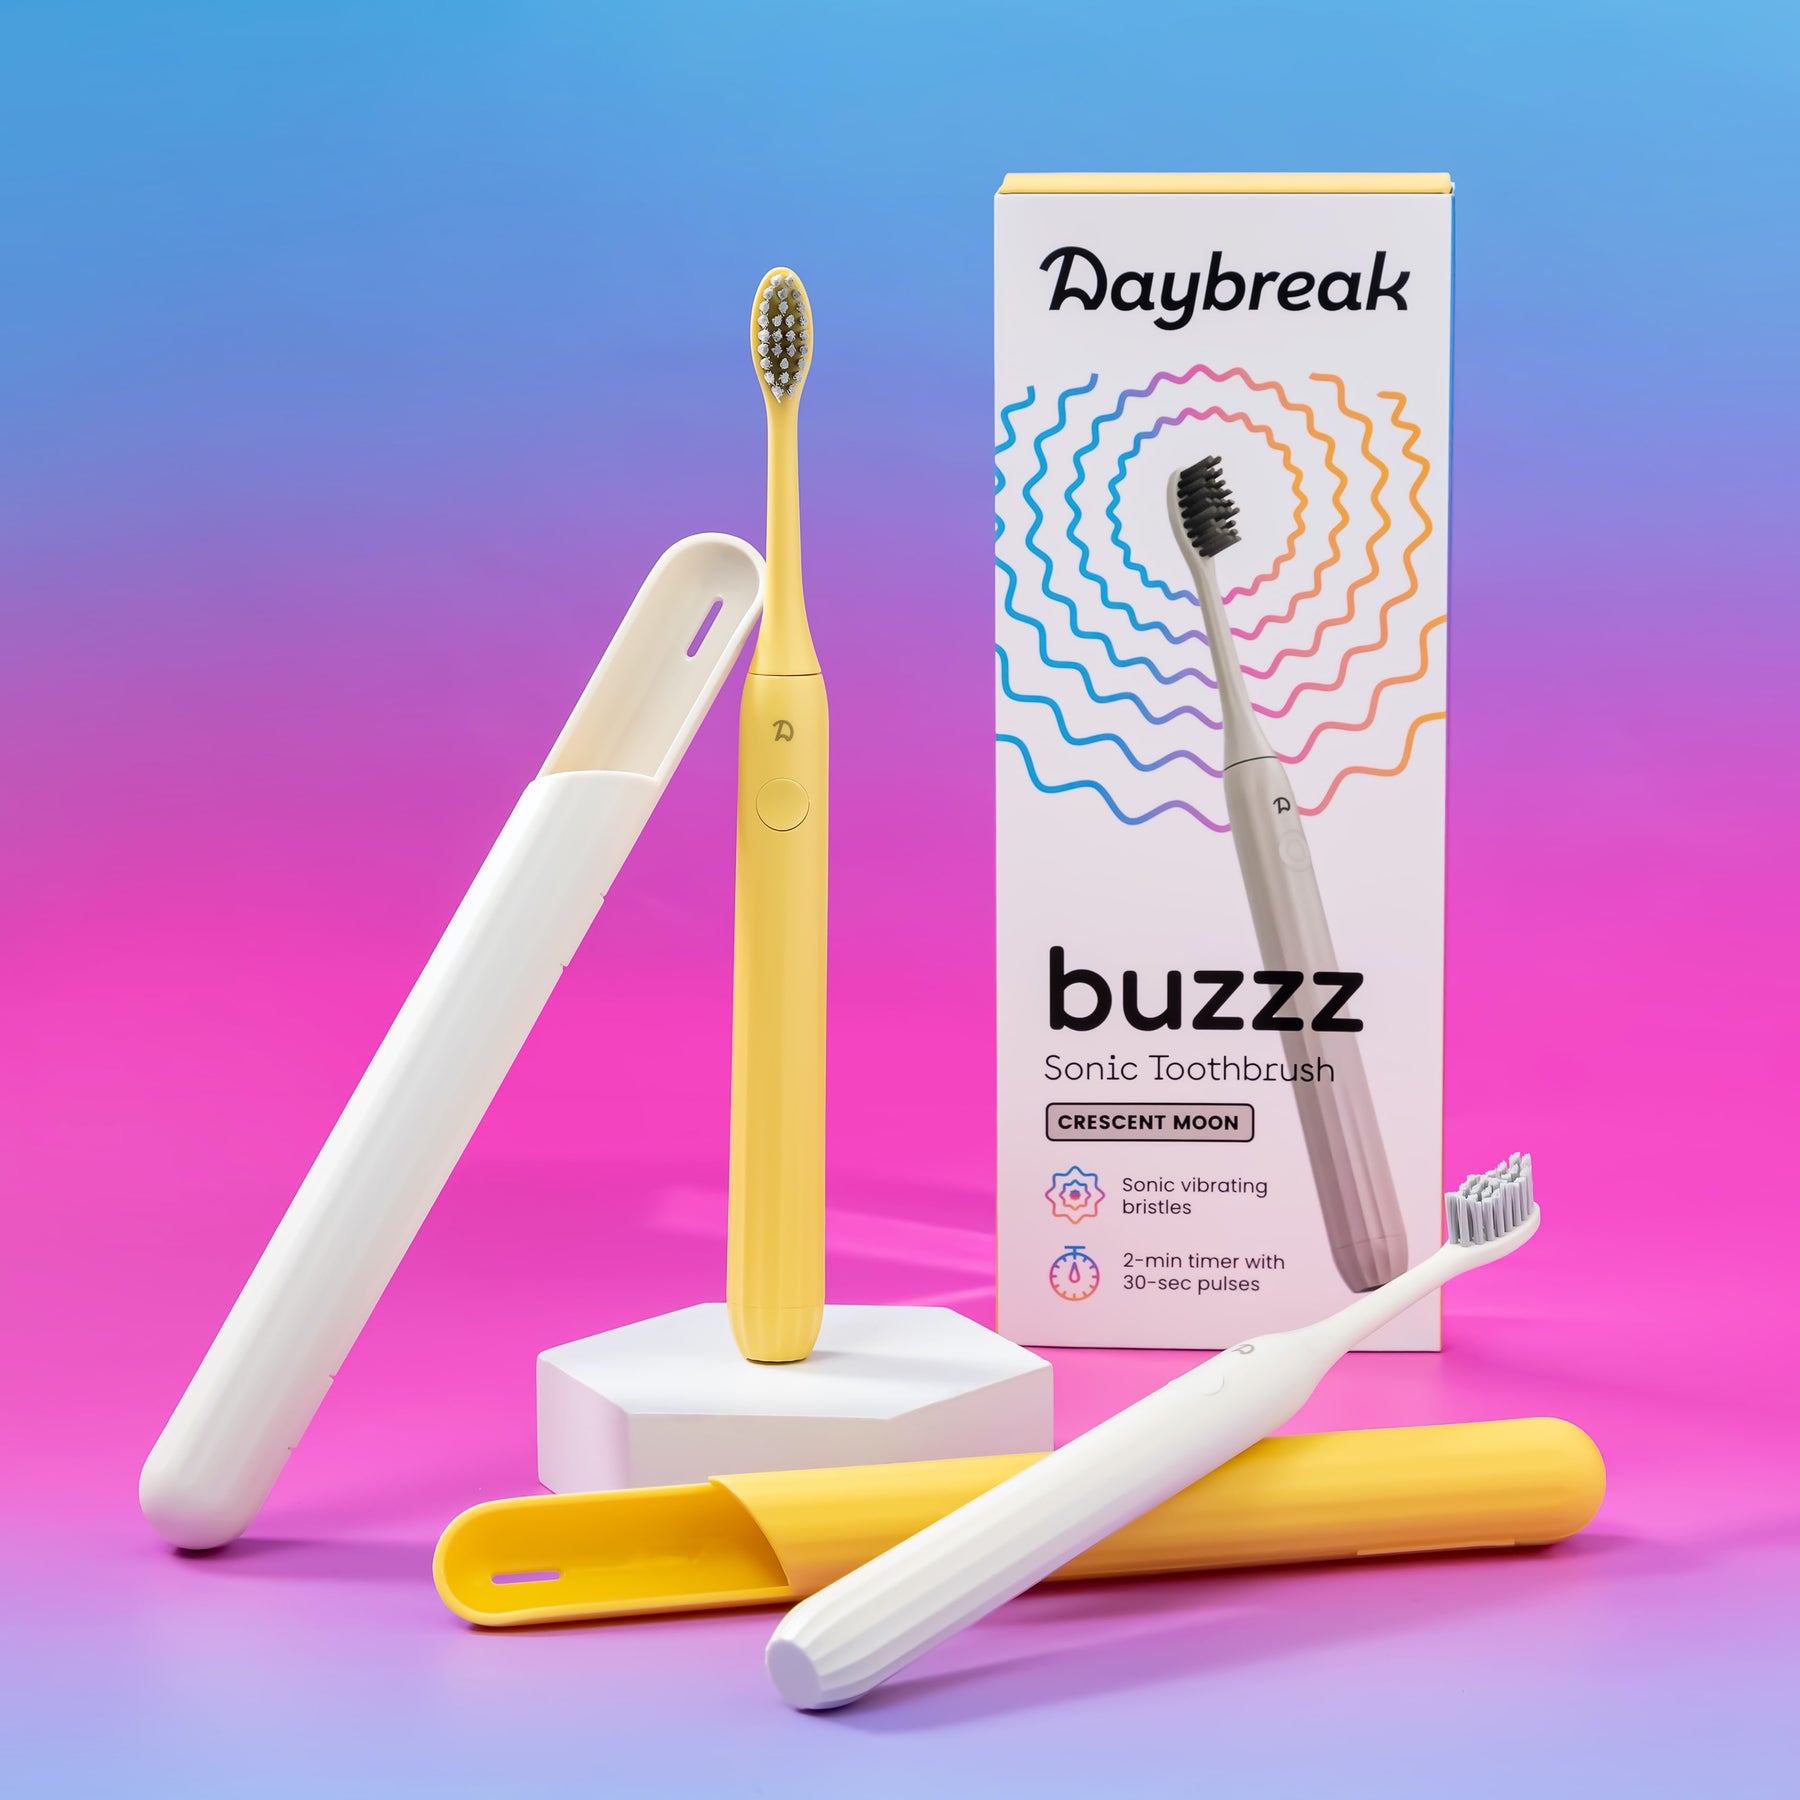 buzzz sonic toothbrush with travel case